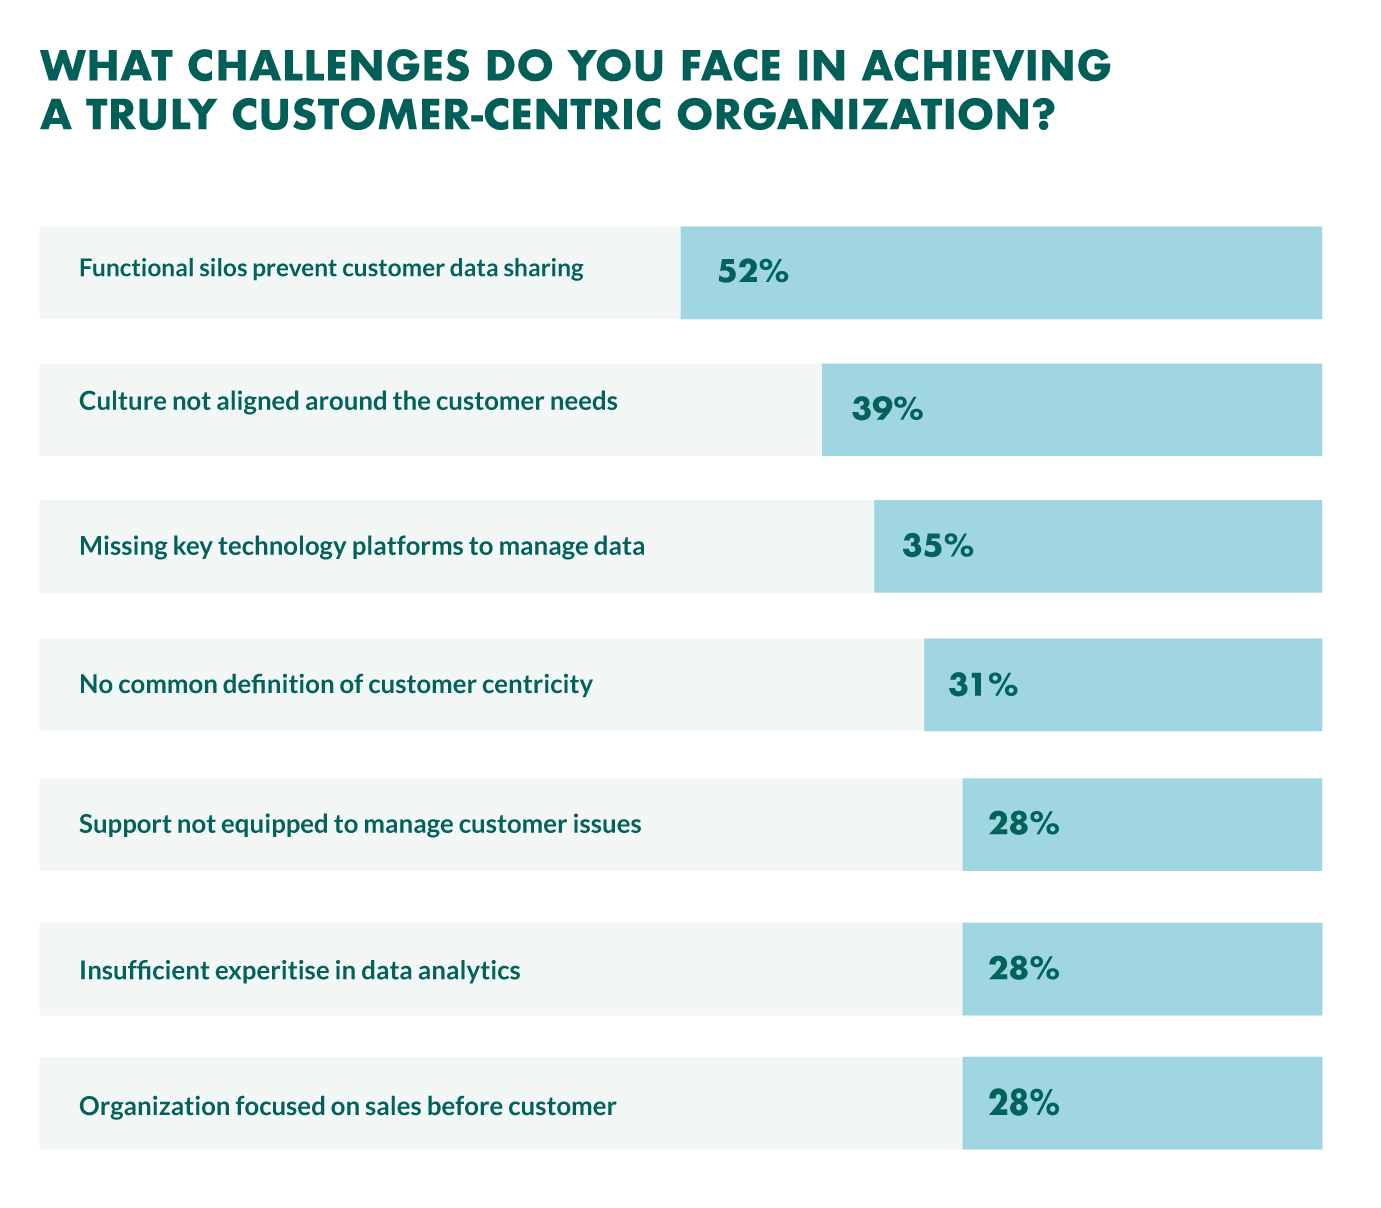 customer-centric challenges